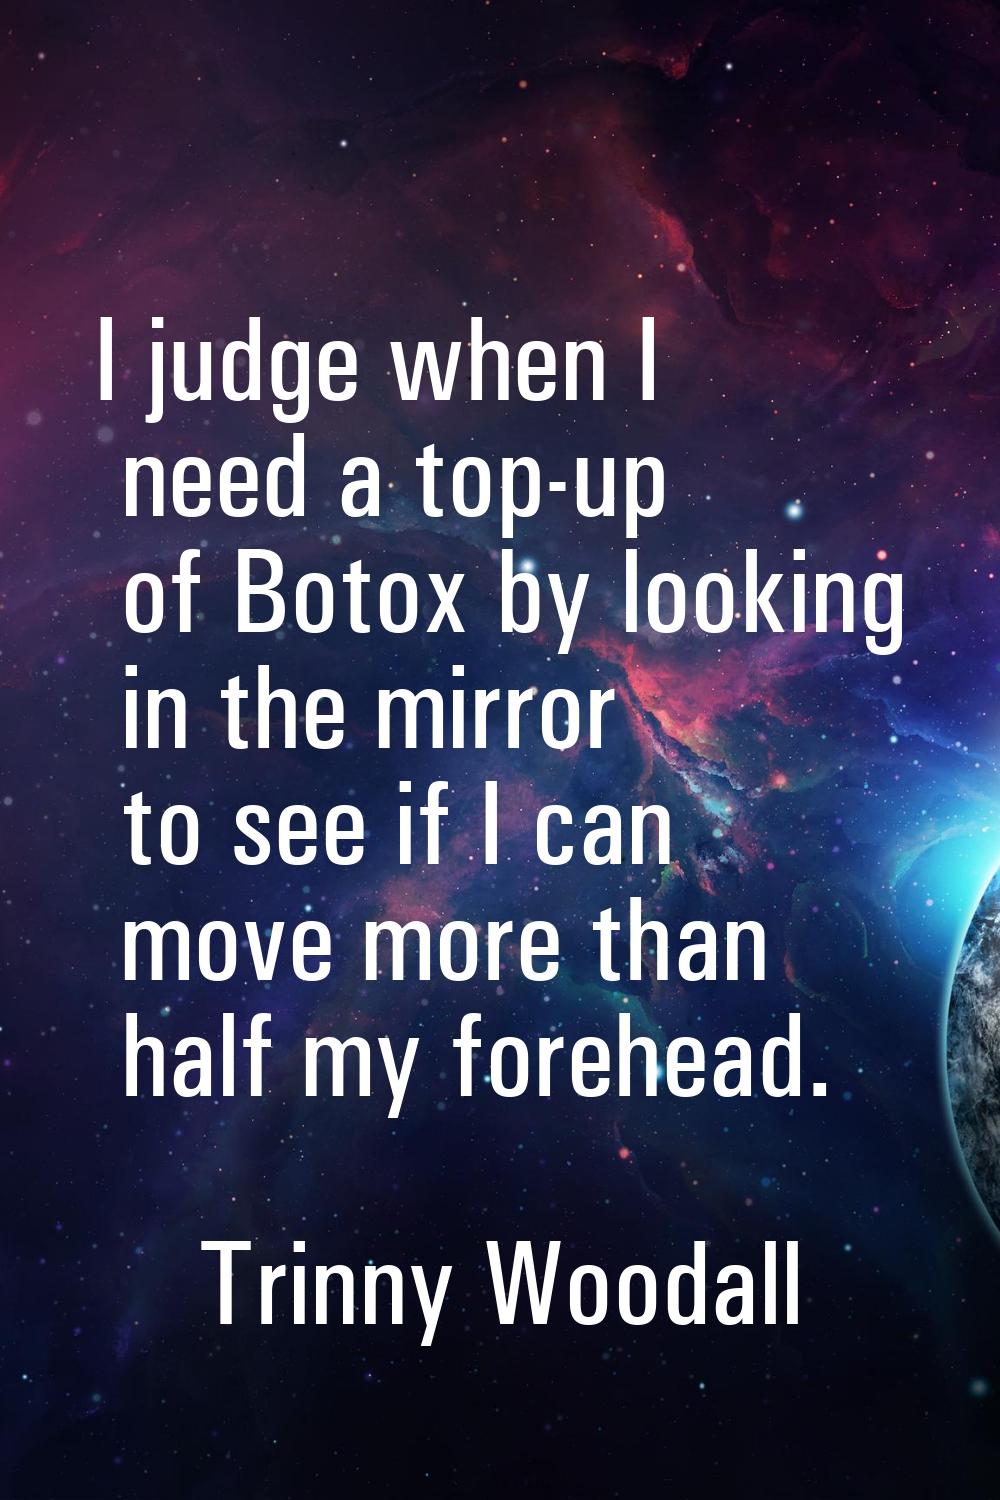 I judge when I need a top-up of Botox by looking in the mirror to see if I can move more than half 